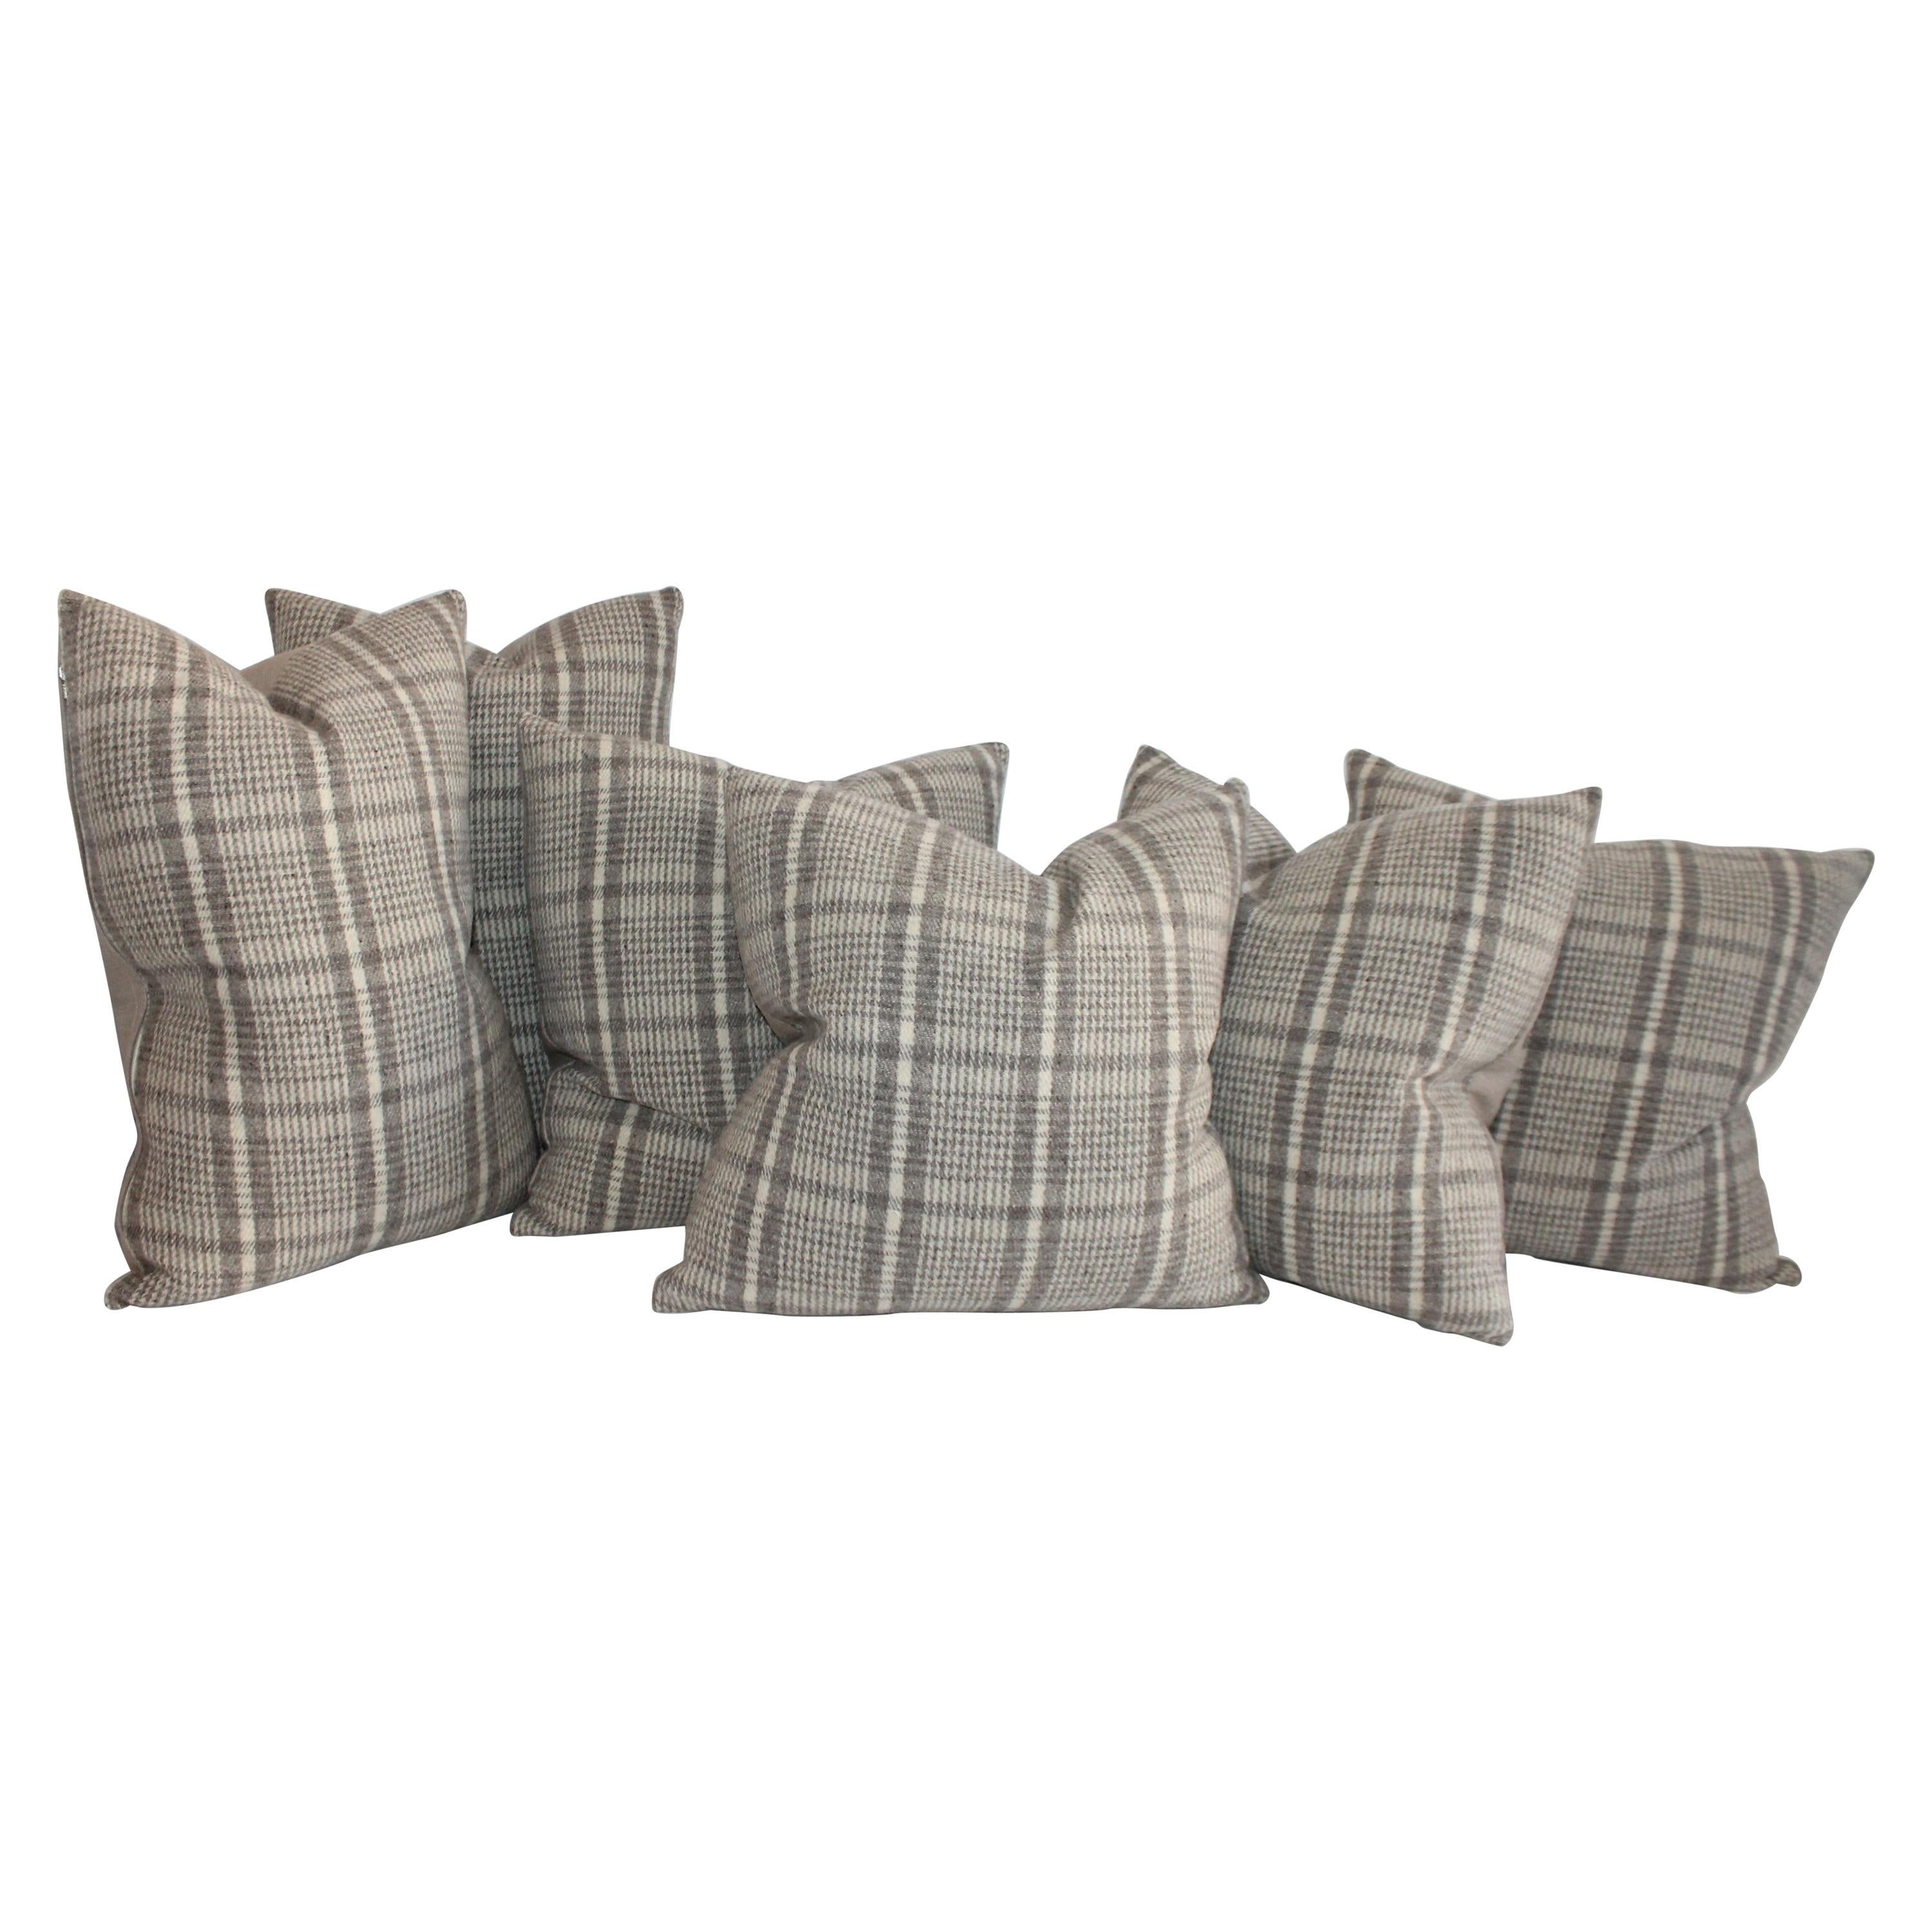 Collection of Wool Plaid Pillows, Six Pillows Total